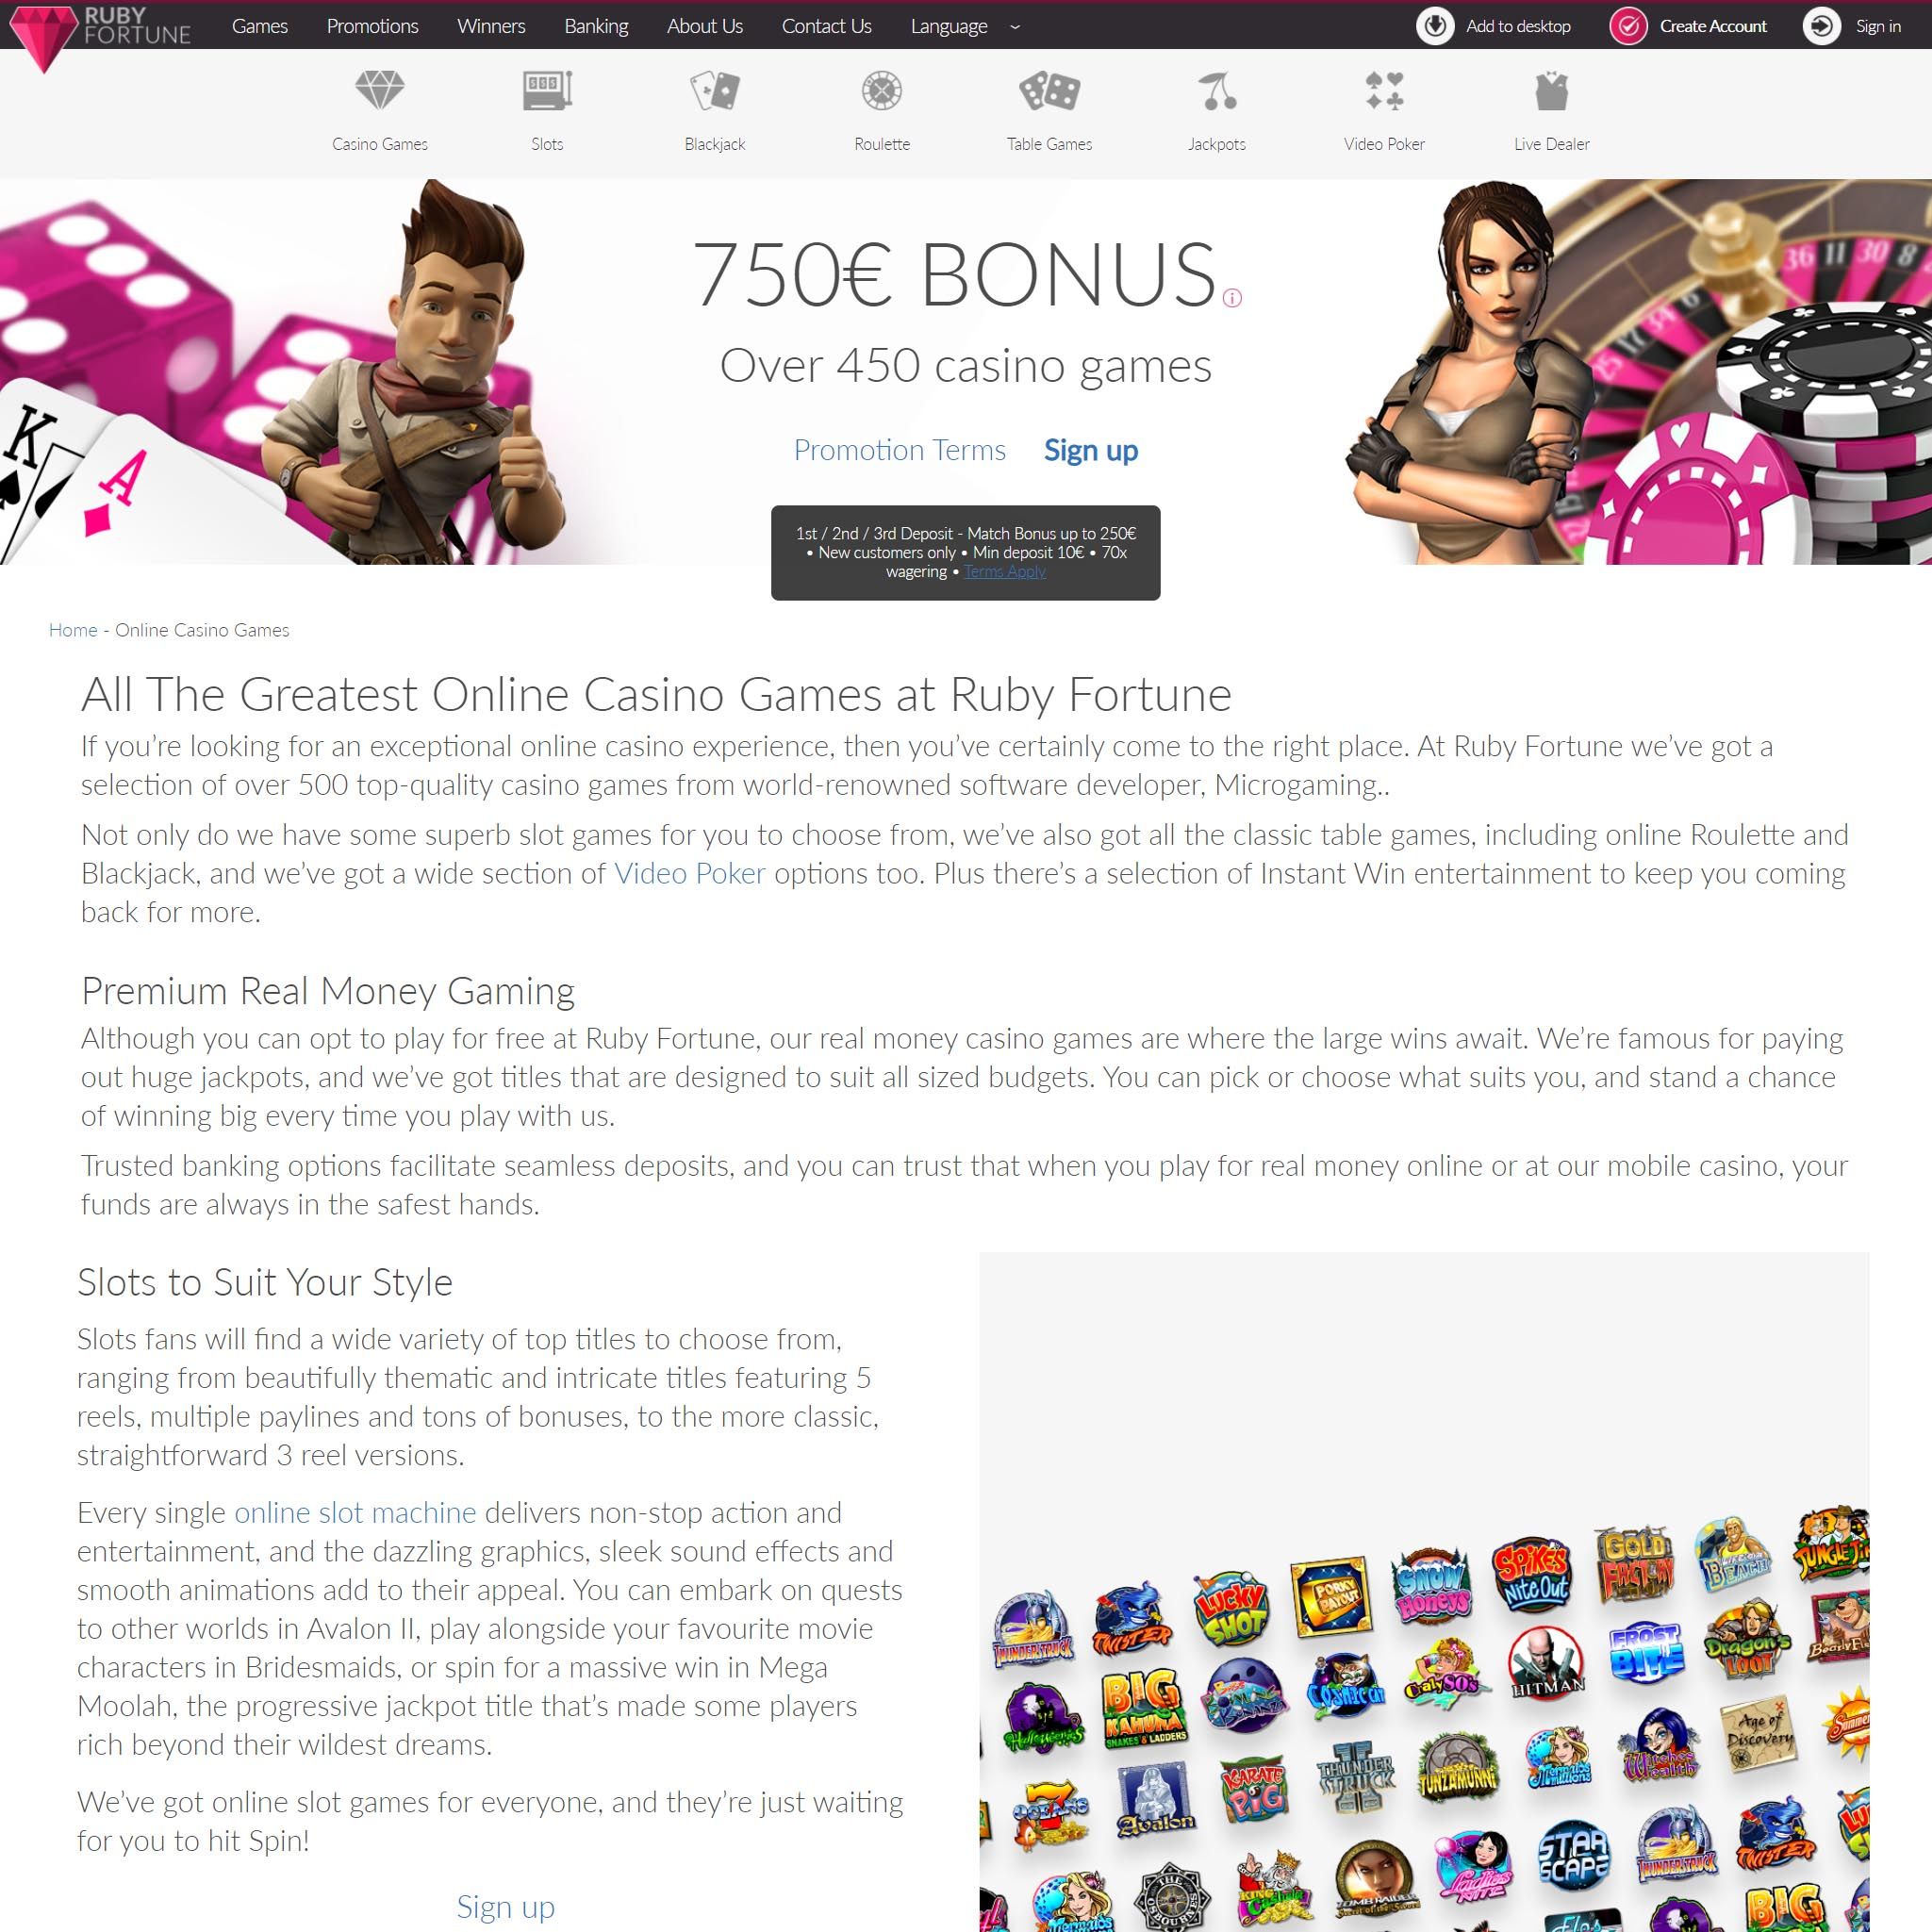 Ruby Fortune Casino full games catalogue